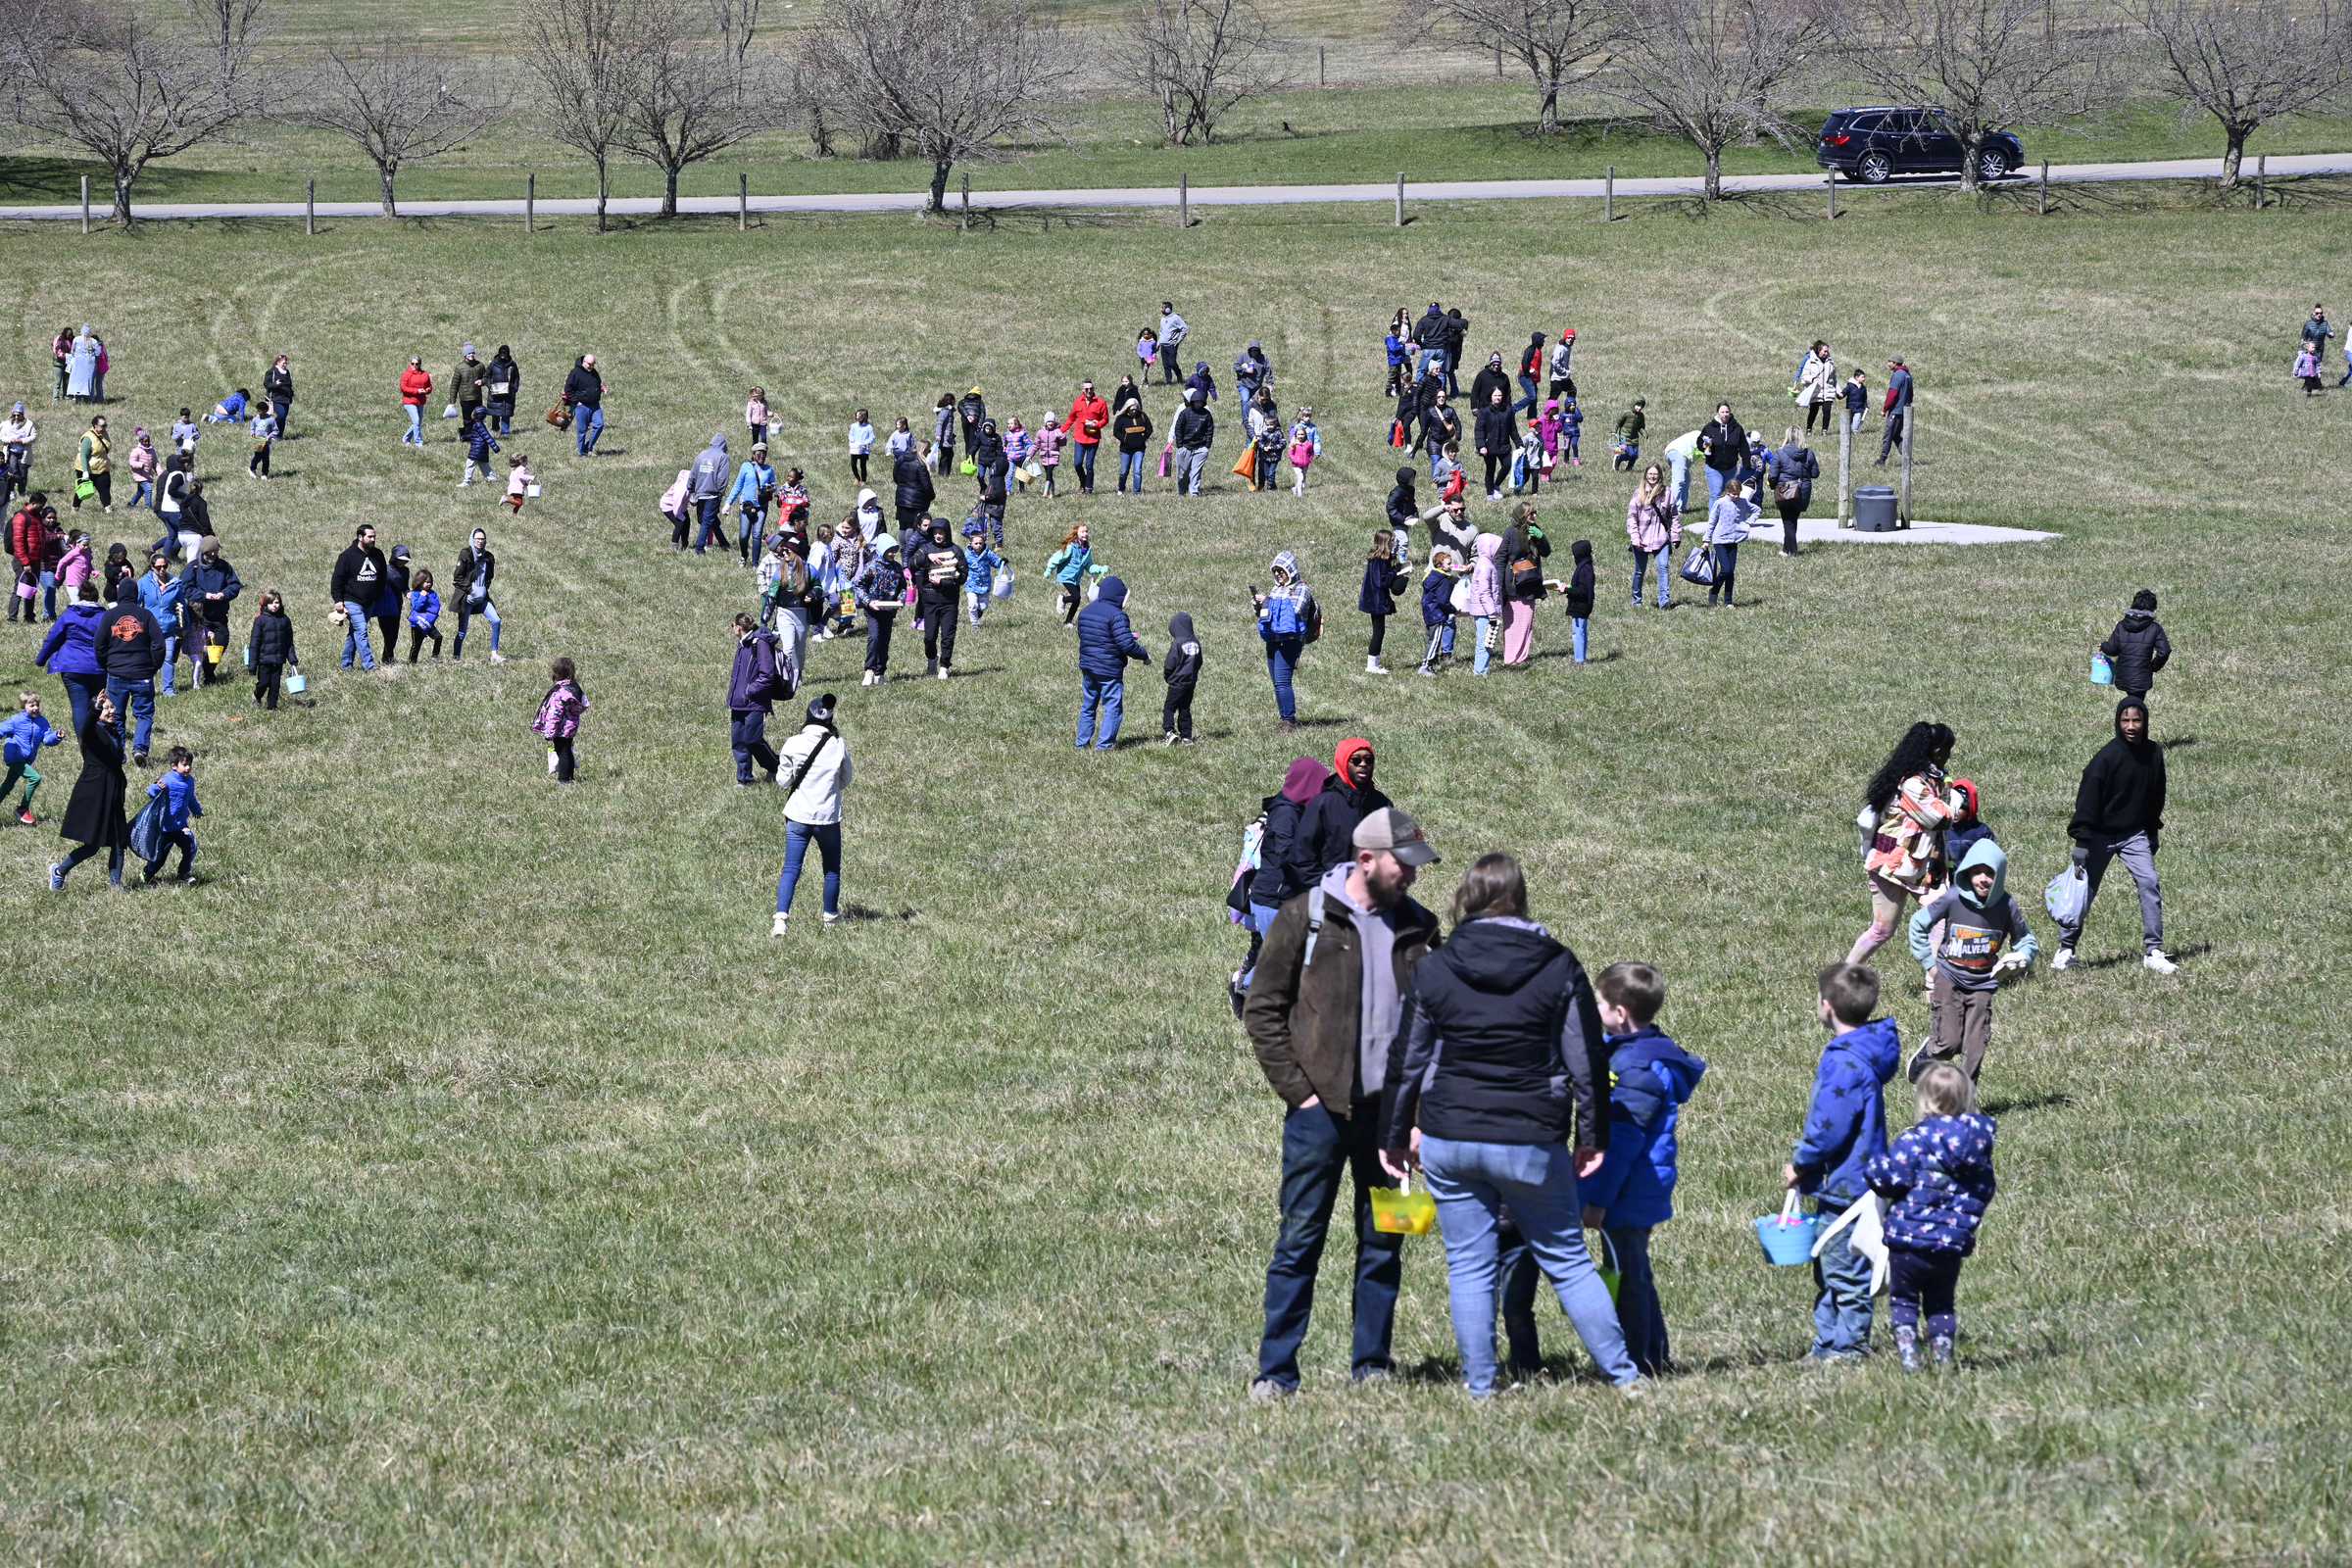 Hundreds of people participated in the three Easter egg hunts during the Coppermine Eggstravaganza at Cascade Park in Hampstead. (Thomas Walker/Freelance)